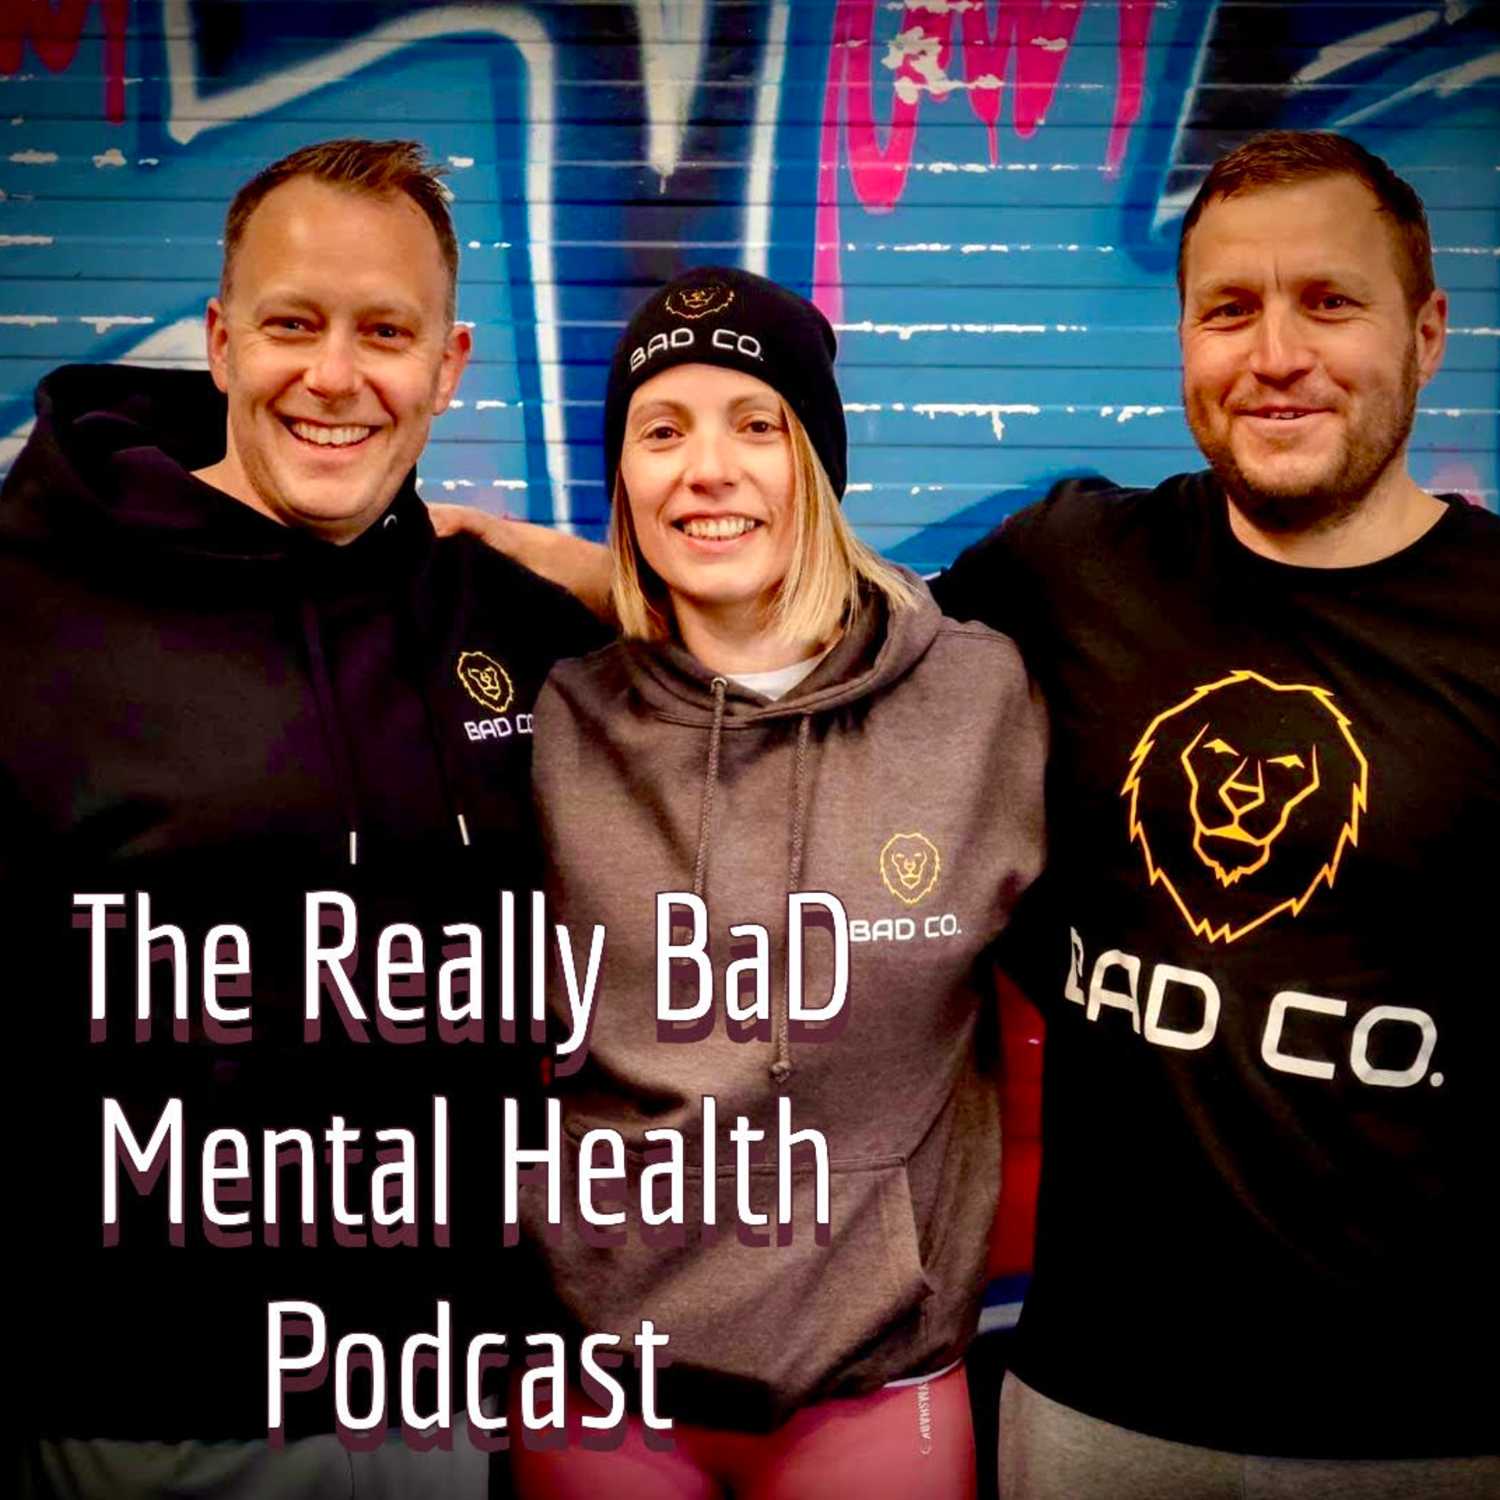 Episode 16. Special Guest - Children’s counsellor, Shelly Barter.